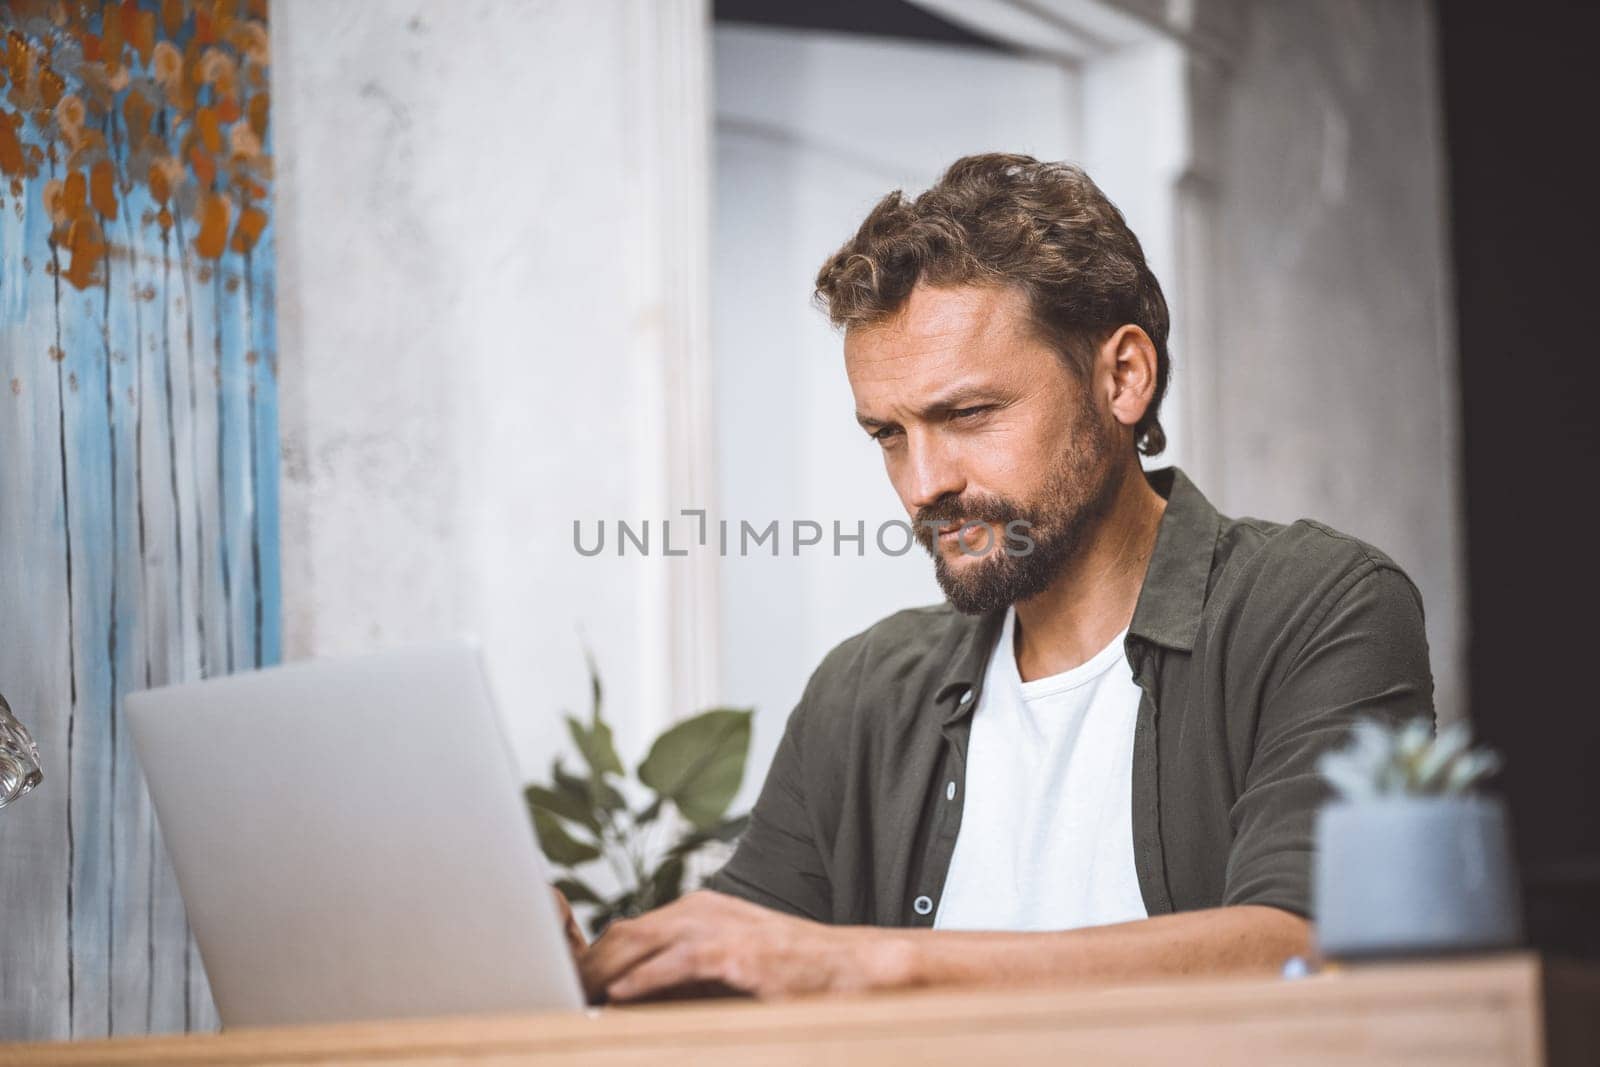 Man is working from home, focused on laptop while sitting at desk in home office. He freelancer or digital nomad, taking advantage of flexibility that remote work provides. Idea of productive remote work, with man being concentrated and productive while enjoying the comfort of own home. High quality photo